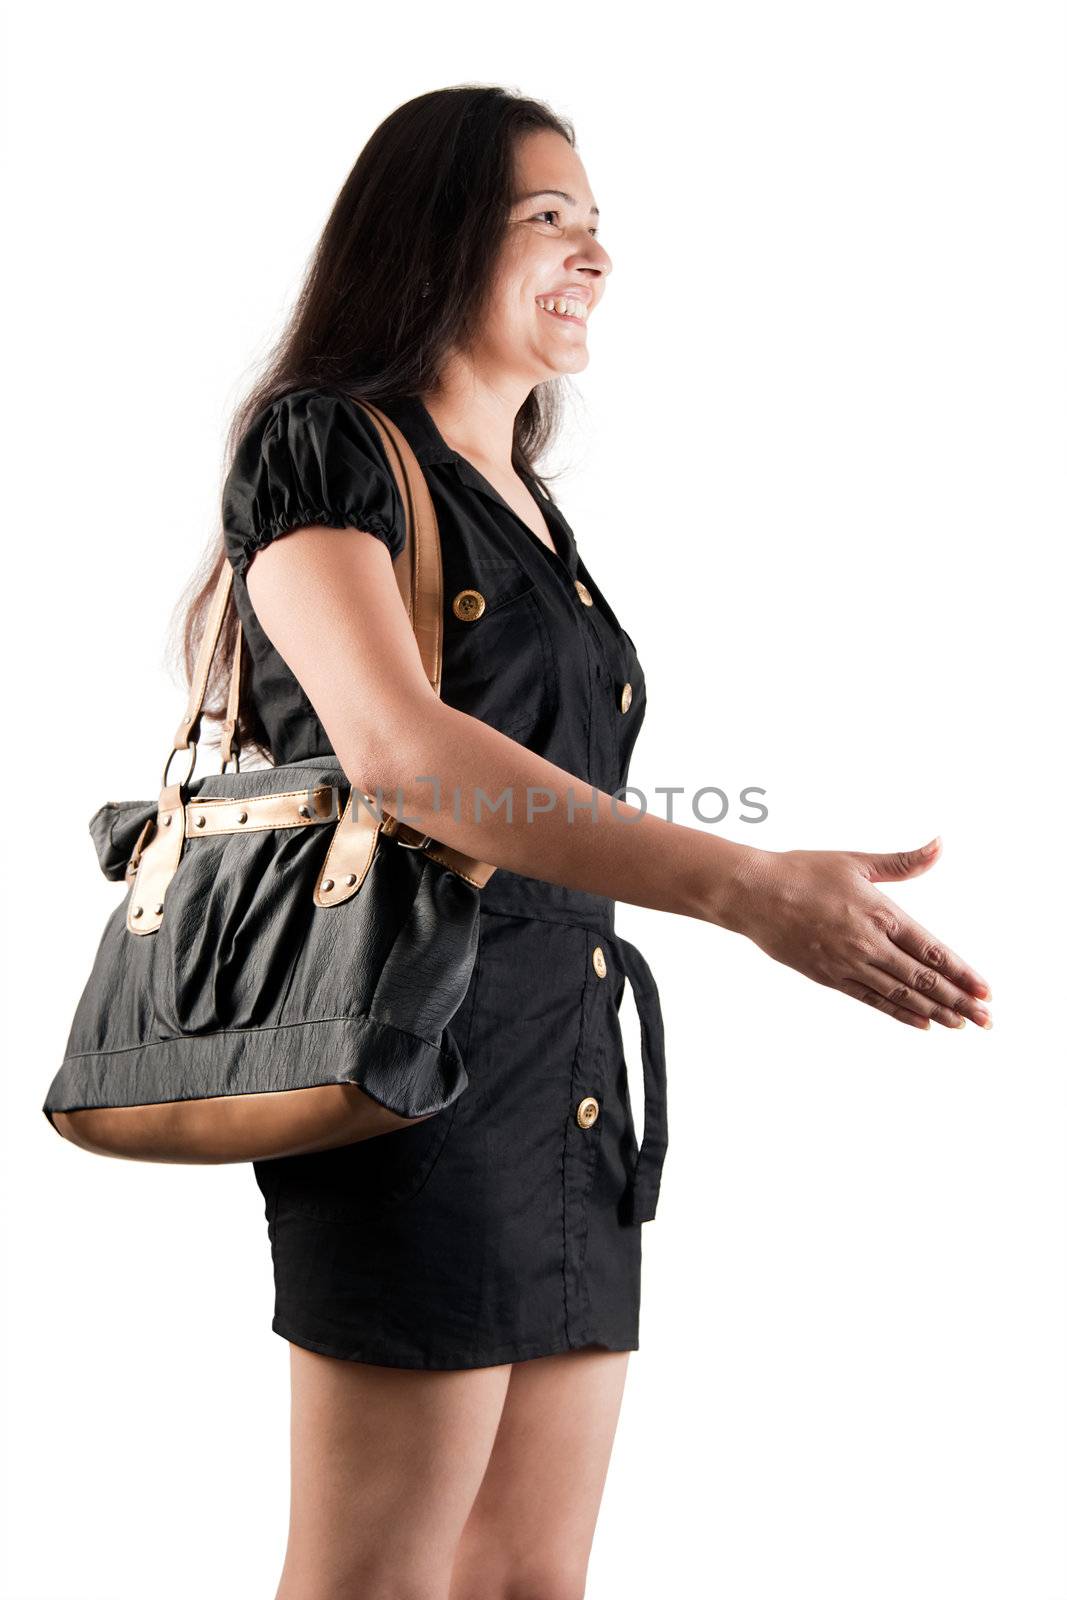 Indian Fashion model with purse isolated on light background